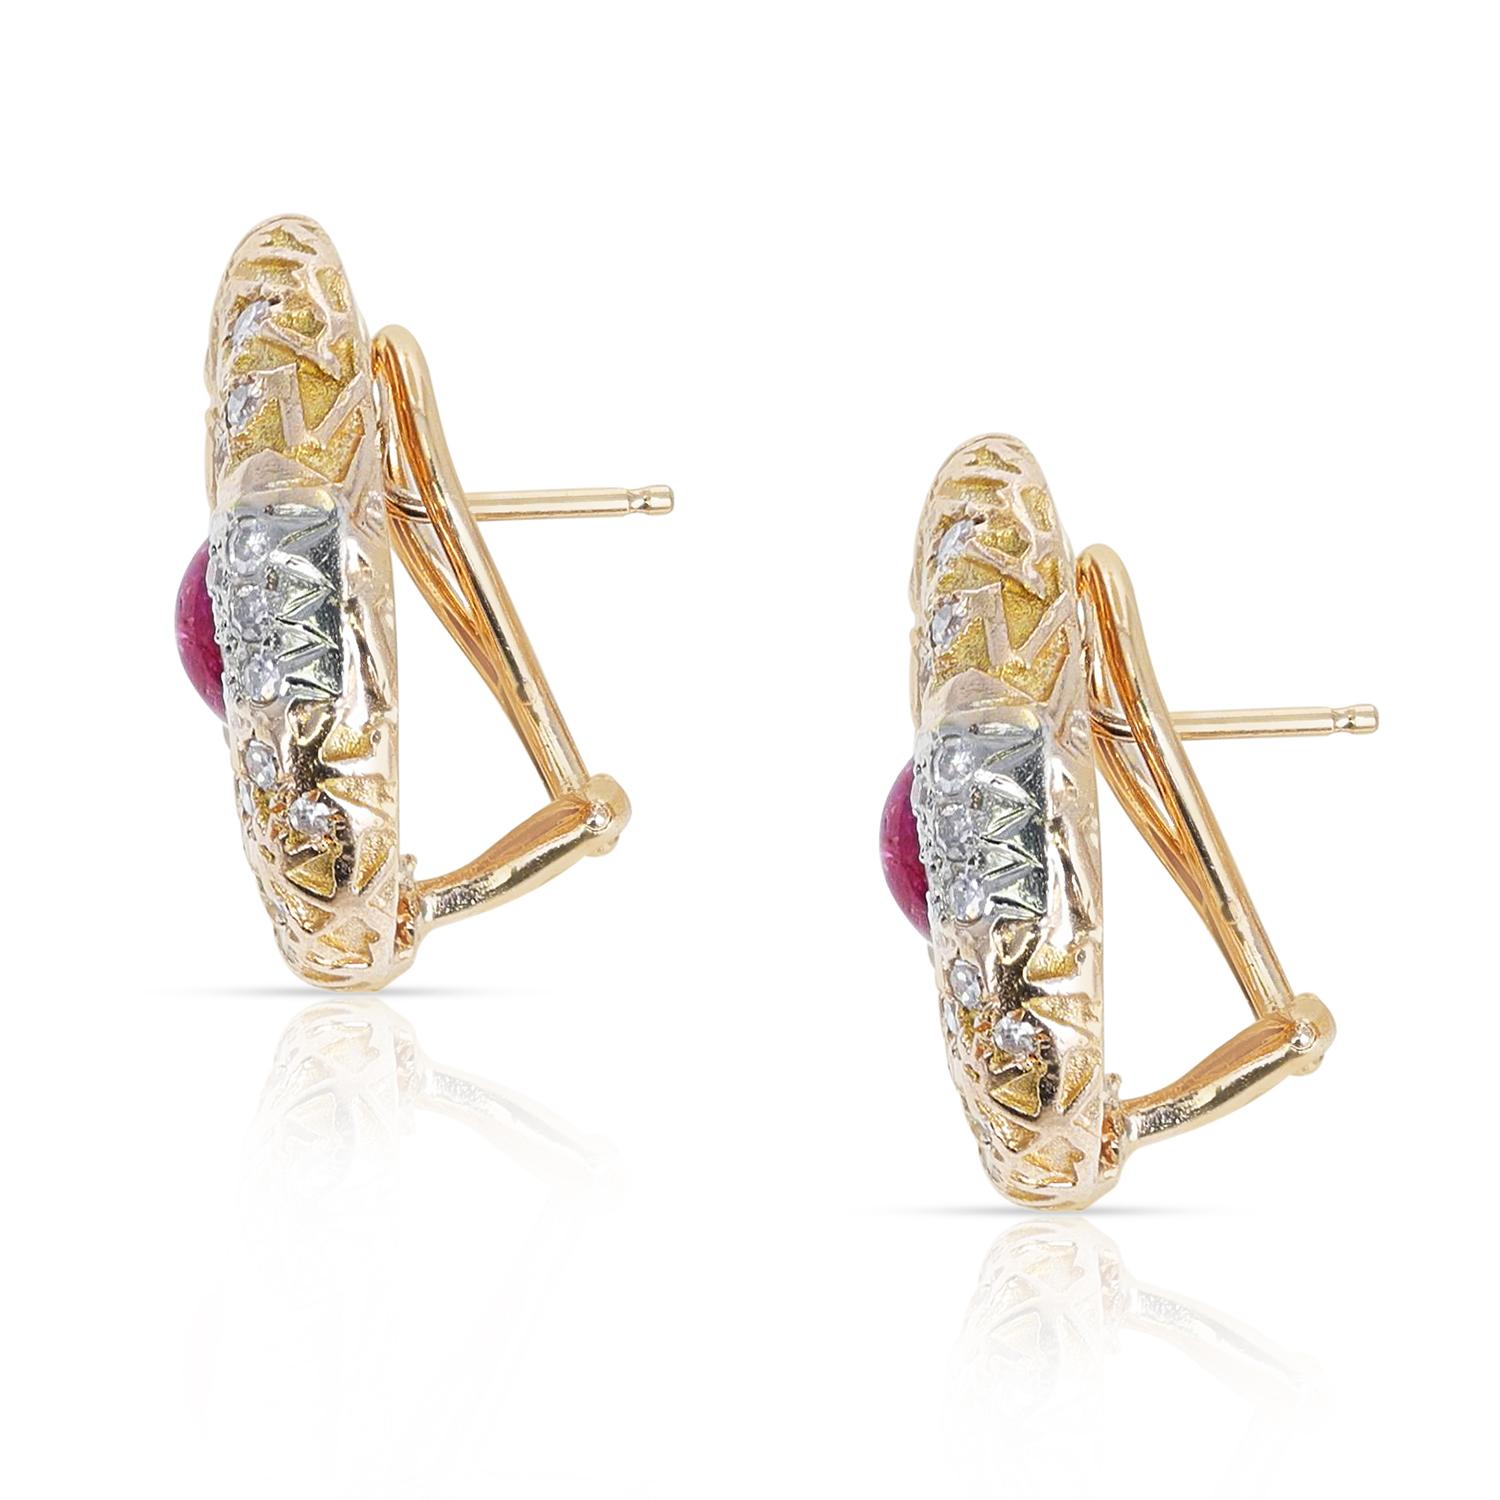 A stylish pair of Hammered Gold Ruby Cabochon and Diamond Earrings made in 14K Gold. The weight of the earrings is 16.98 grams. The length is 0.90